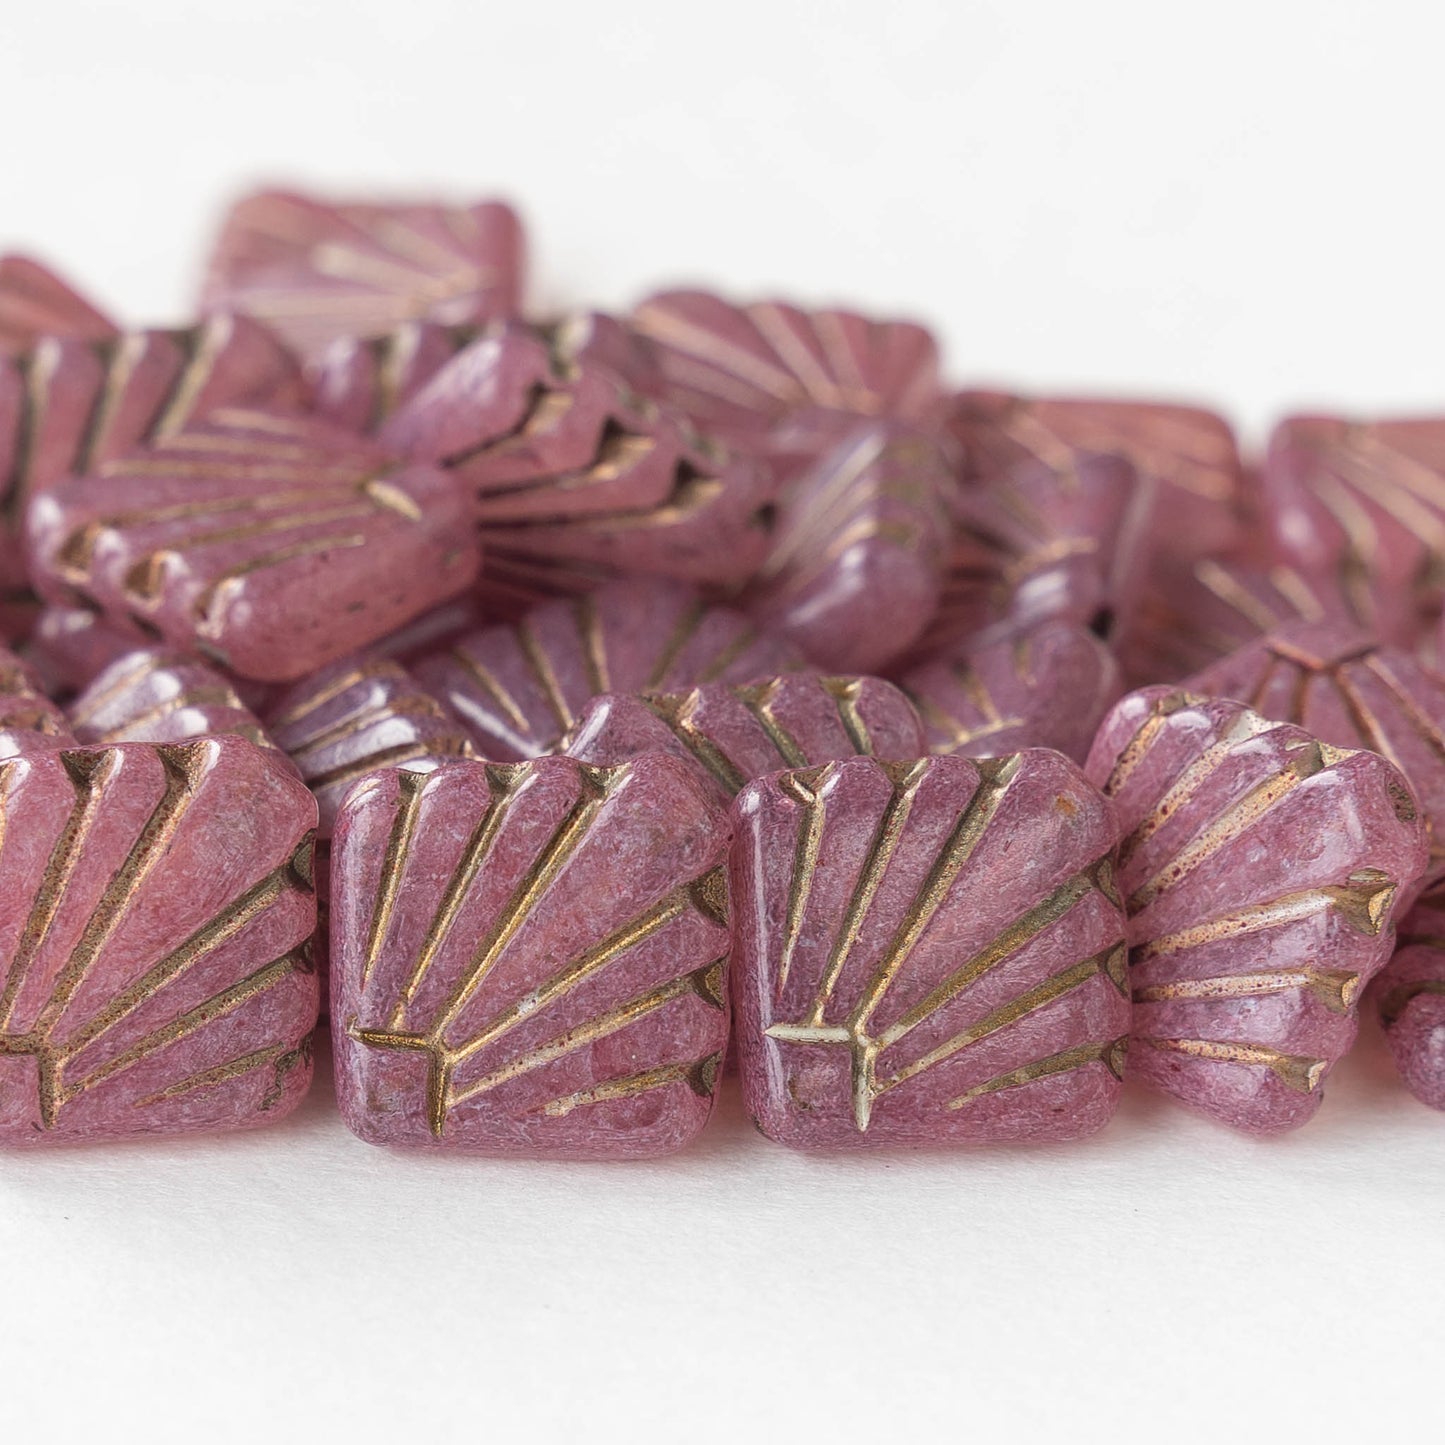 14mm Diafan Beads - Pink Mauve with Gold Wash  - 8 beads